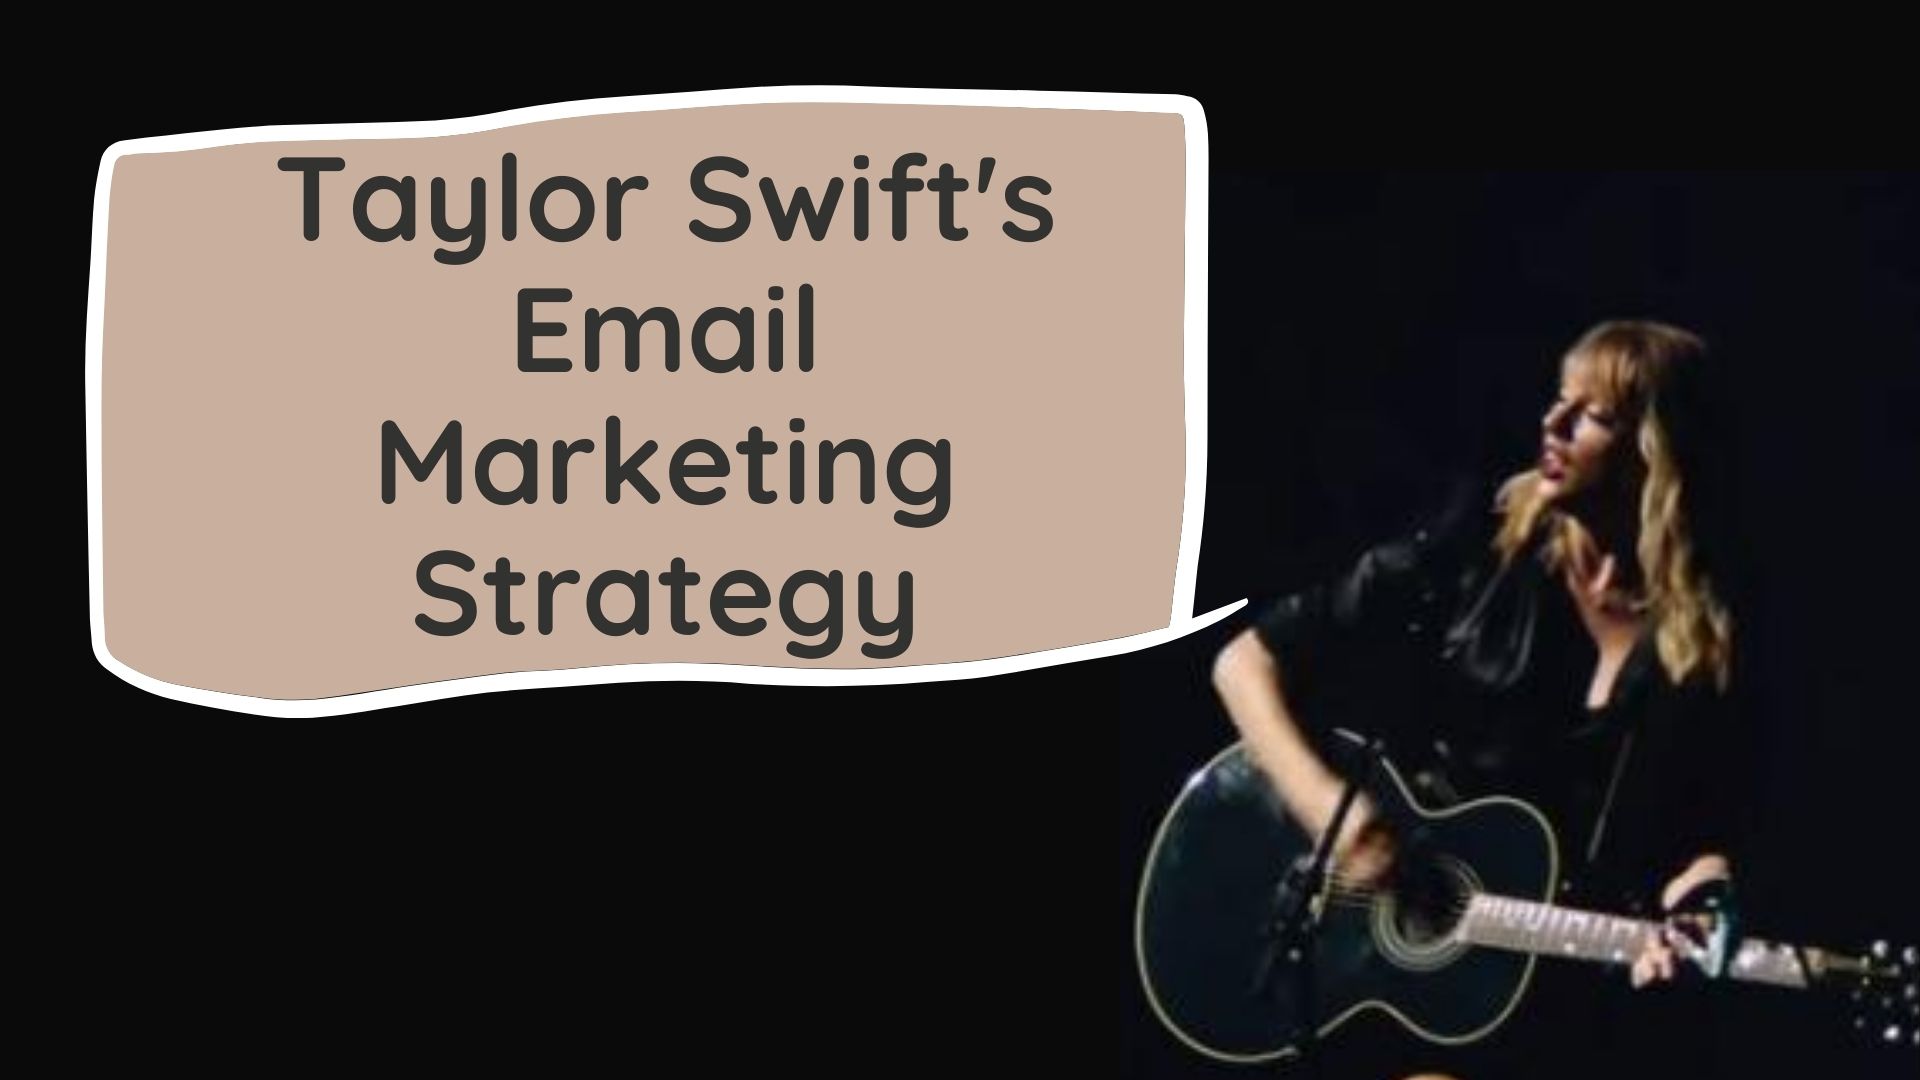 How Taylor Swift uses Email Marketing to promote her music